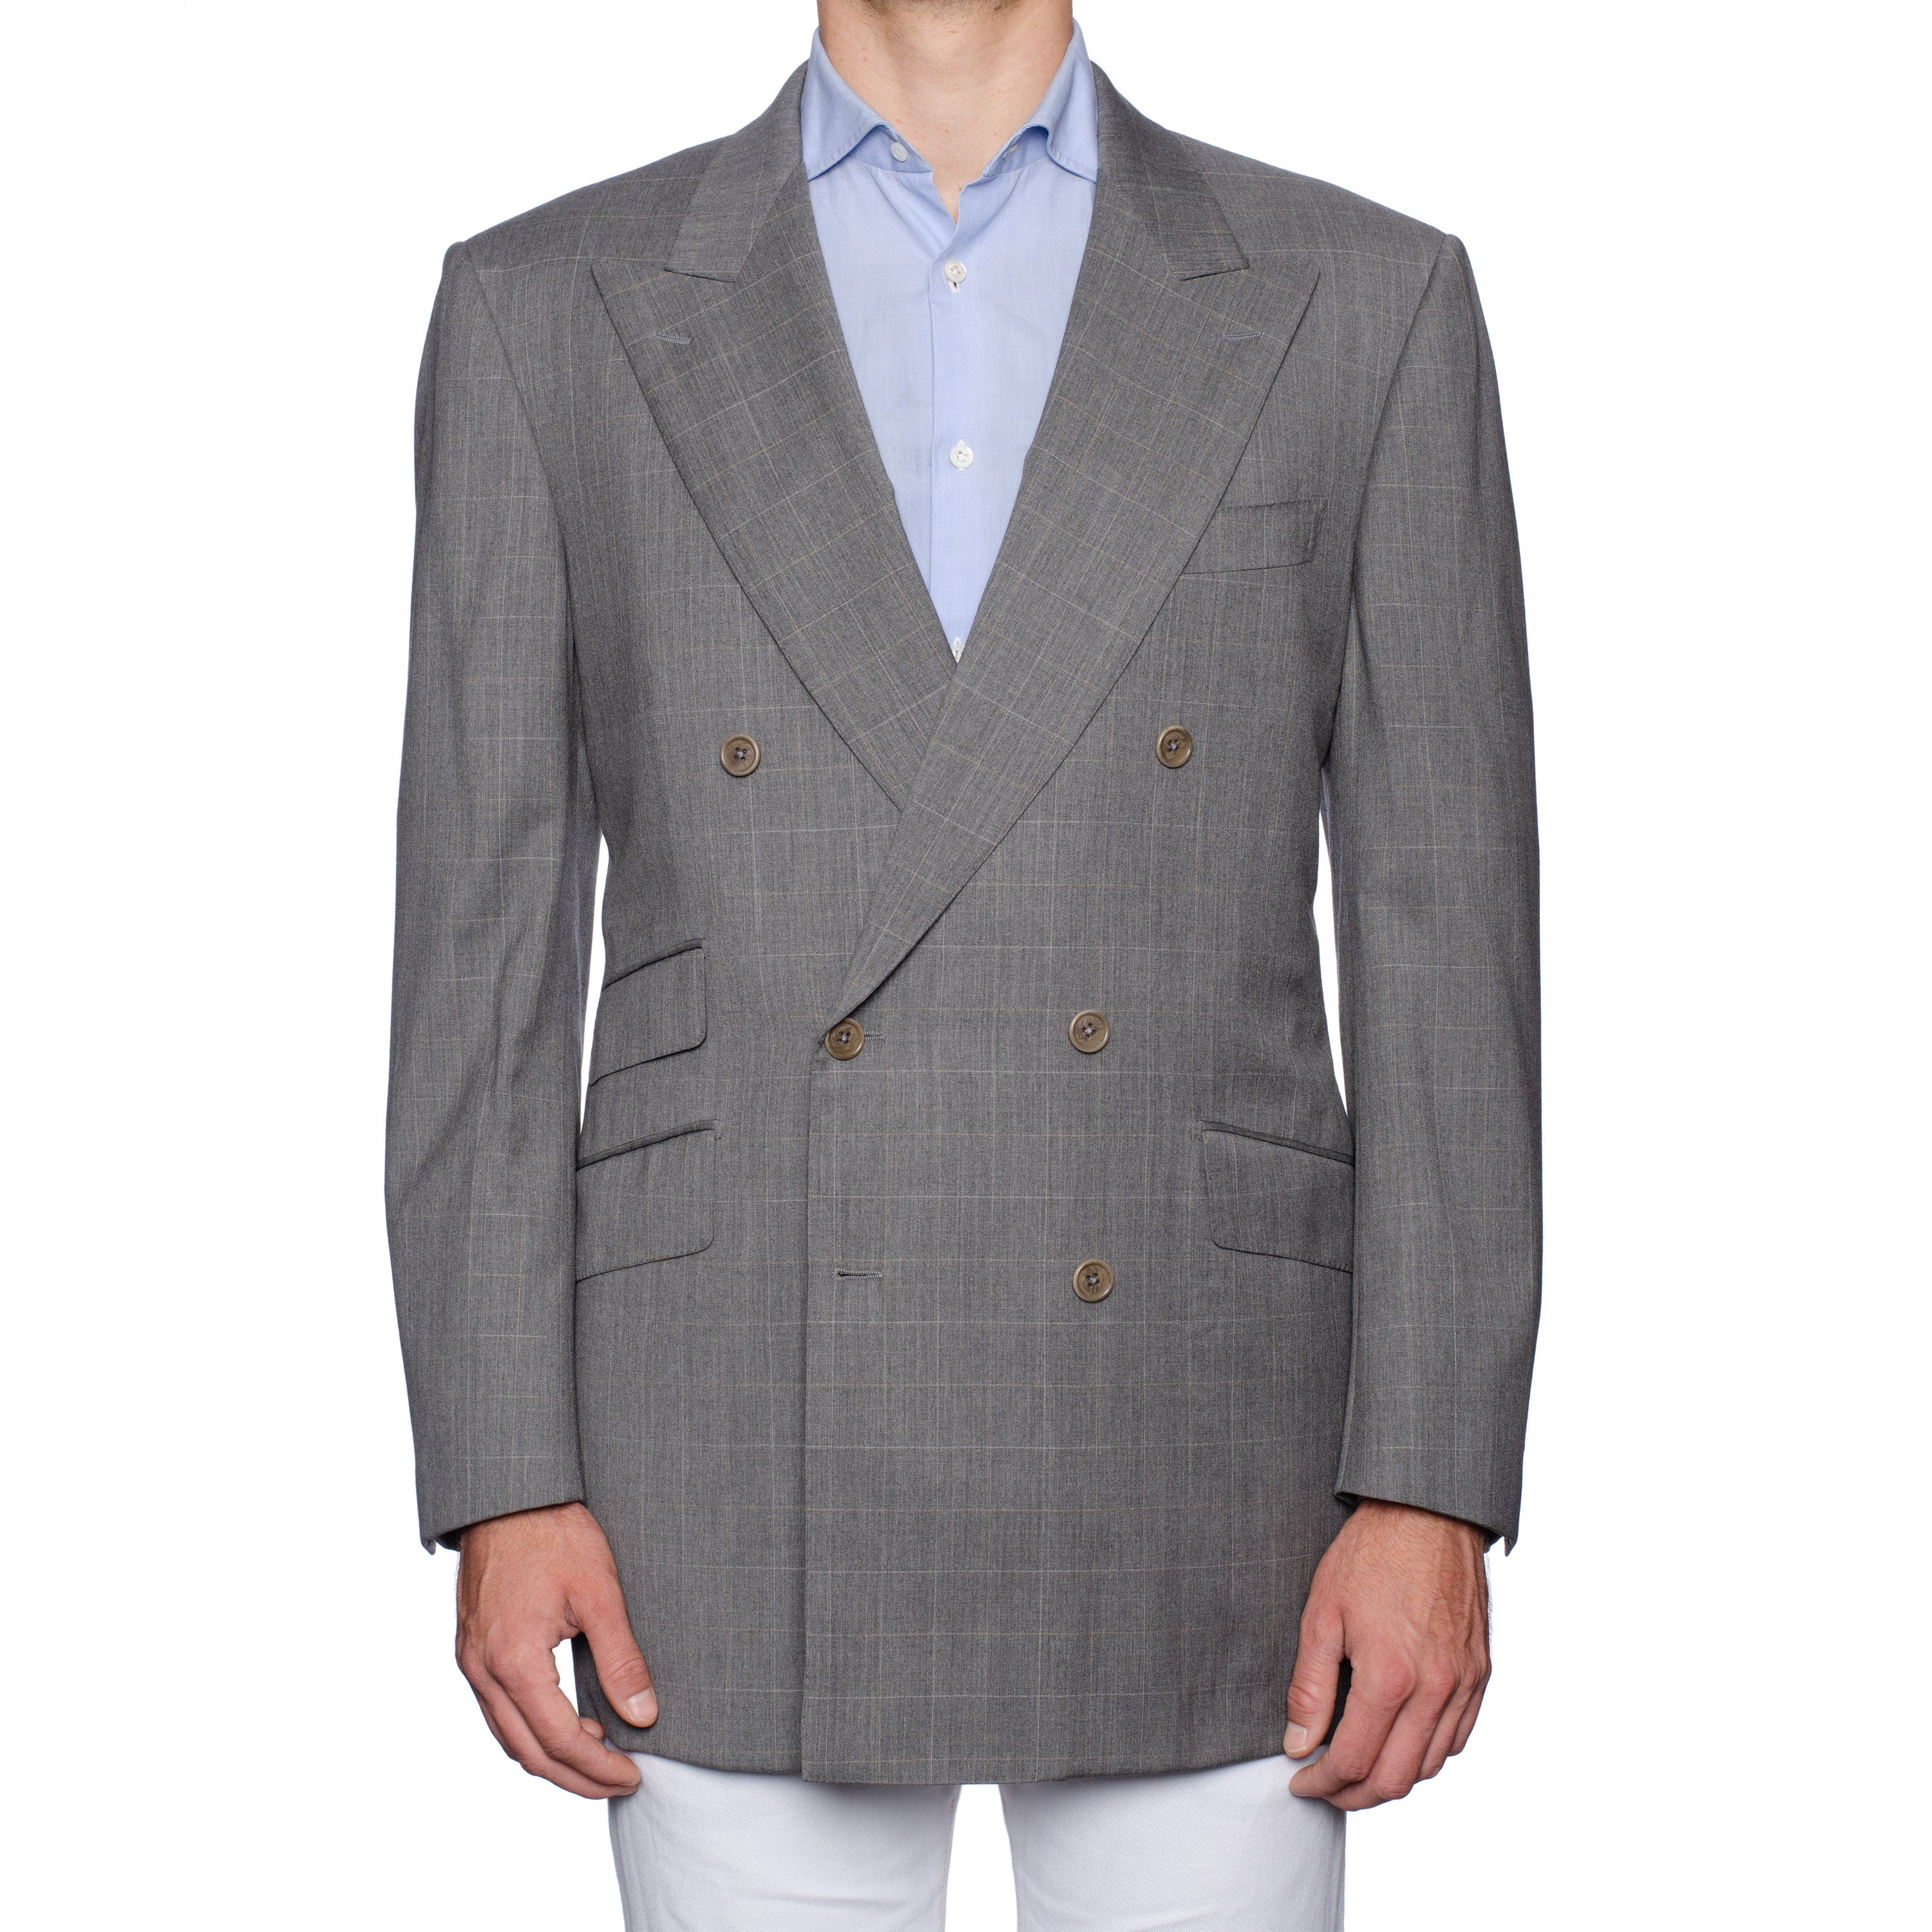 CASTANGIA 1850 Gray Wool Double Breasted Jacket EU 54 NEW US 44